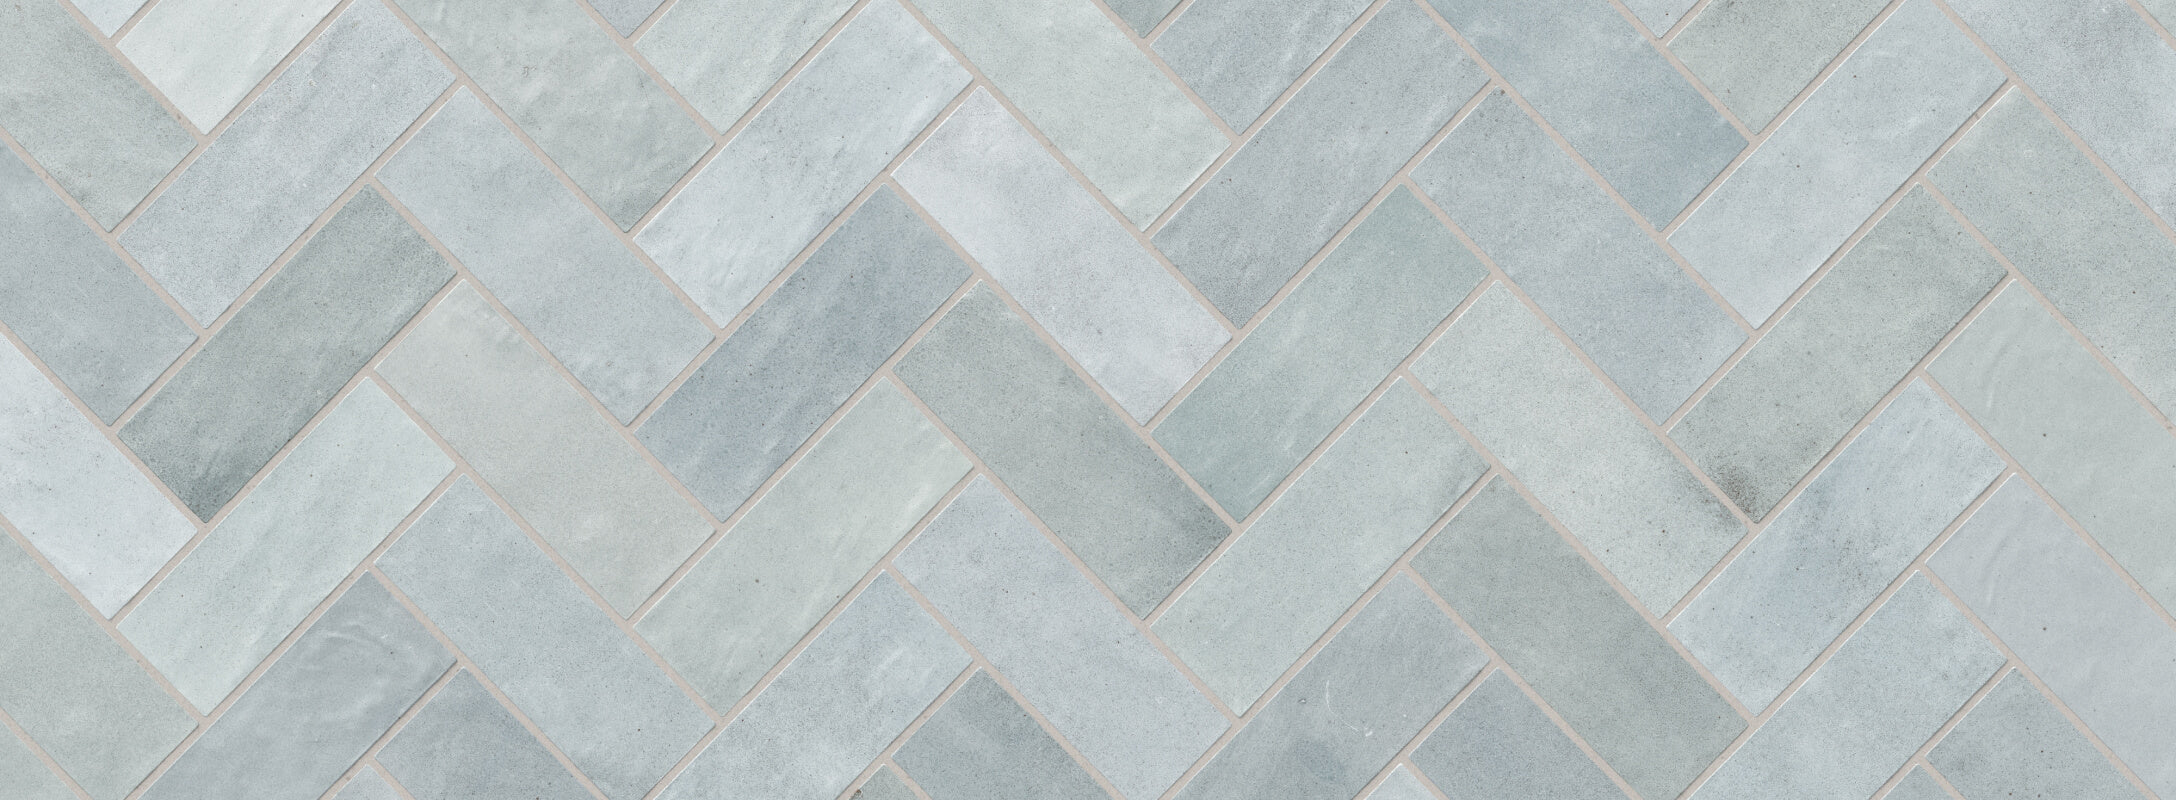 Soft blue herringbone tiles with a subtle texture, perfect for creating a calming and stylish kitchen backsplash